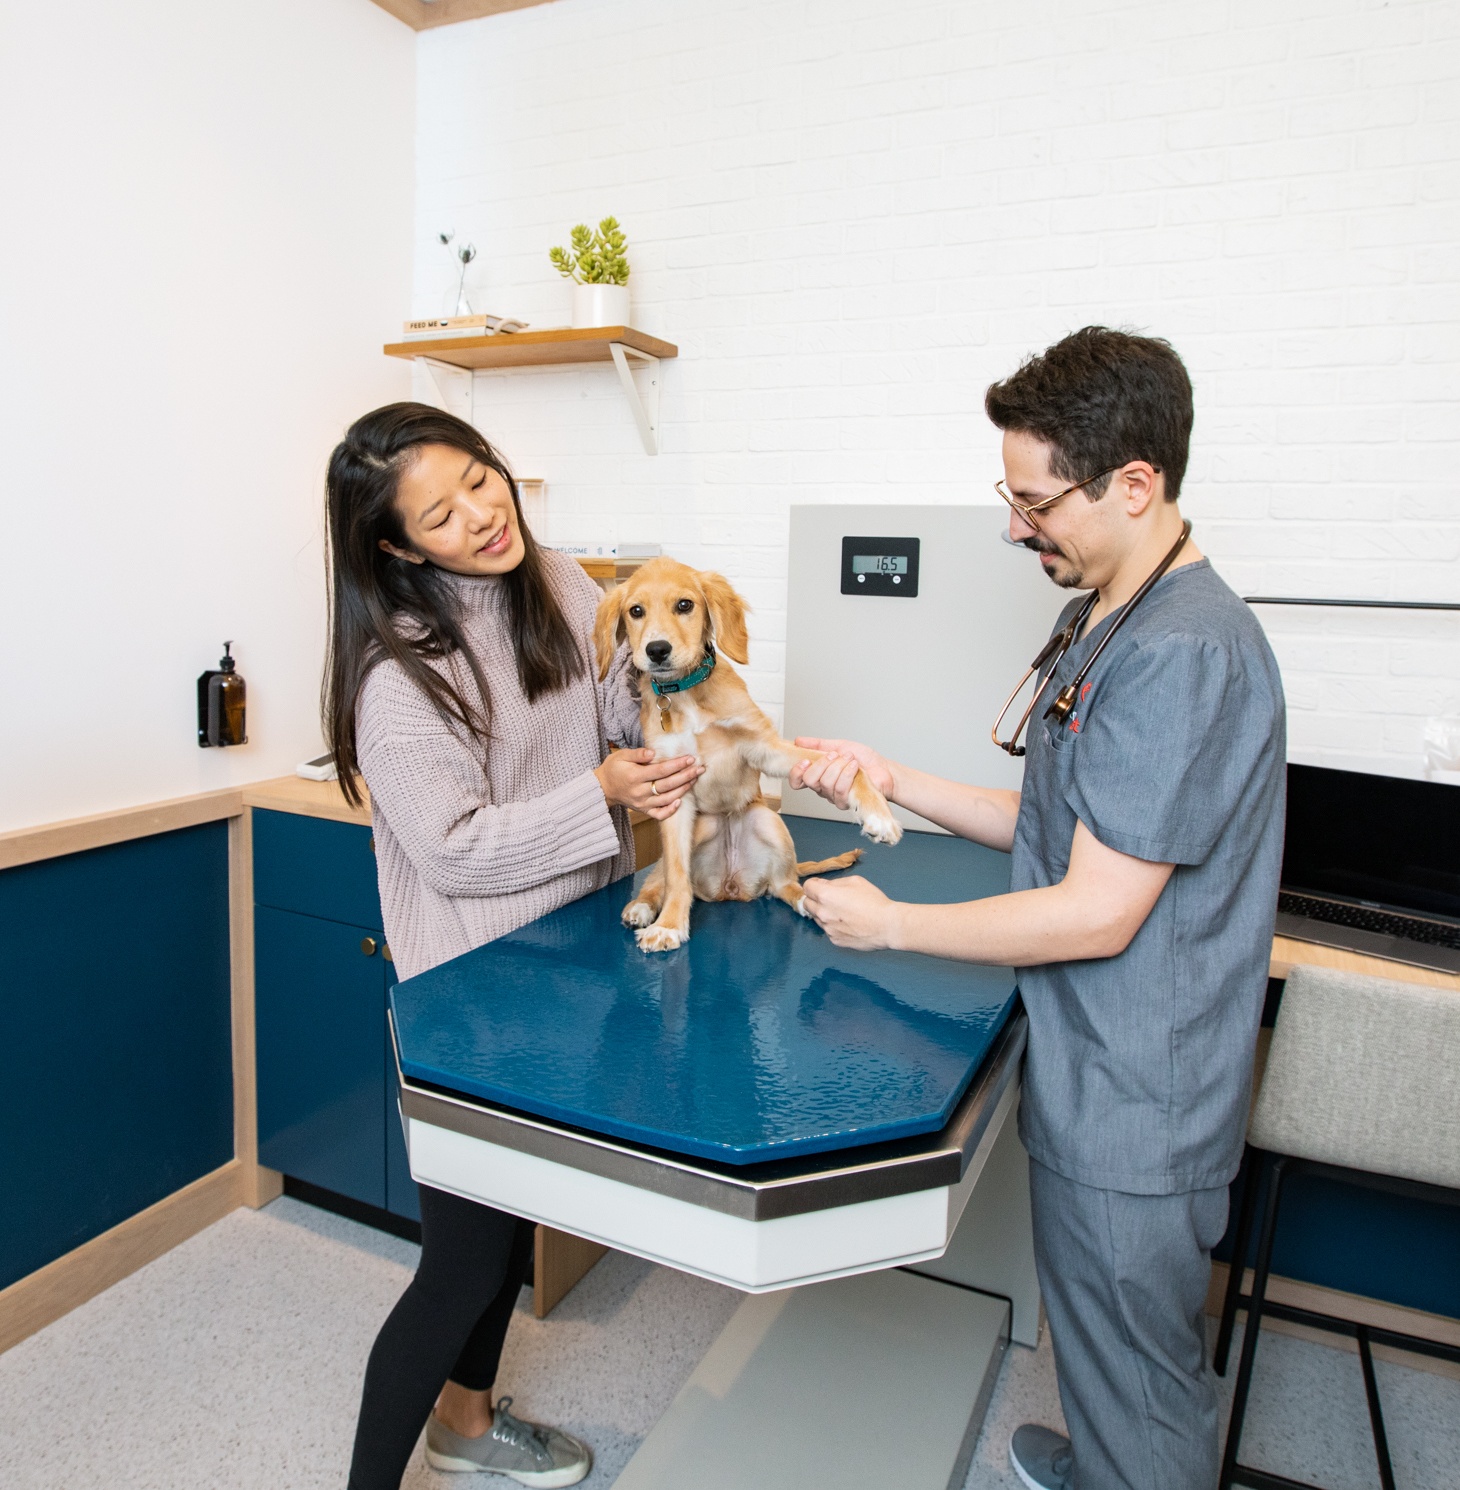 A dog is being examined by a man and woman in a medical office